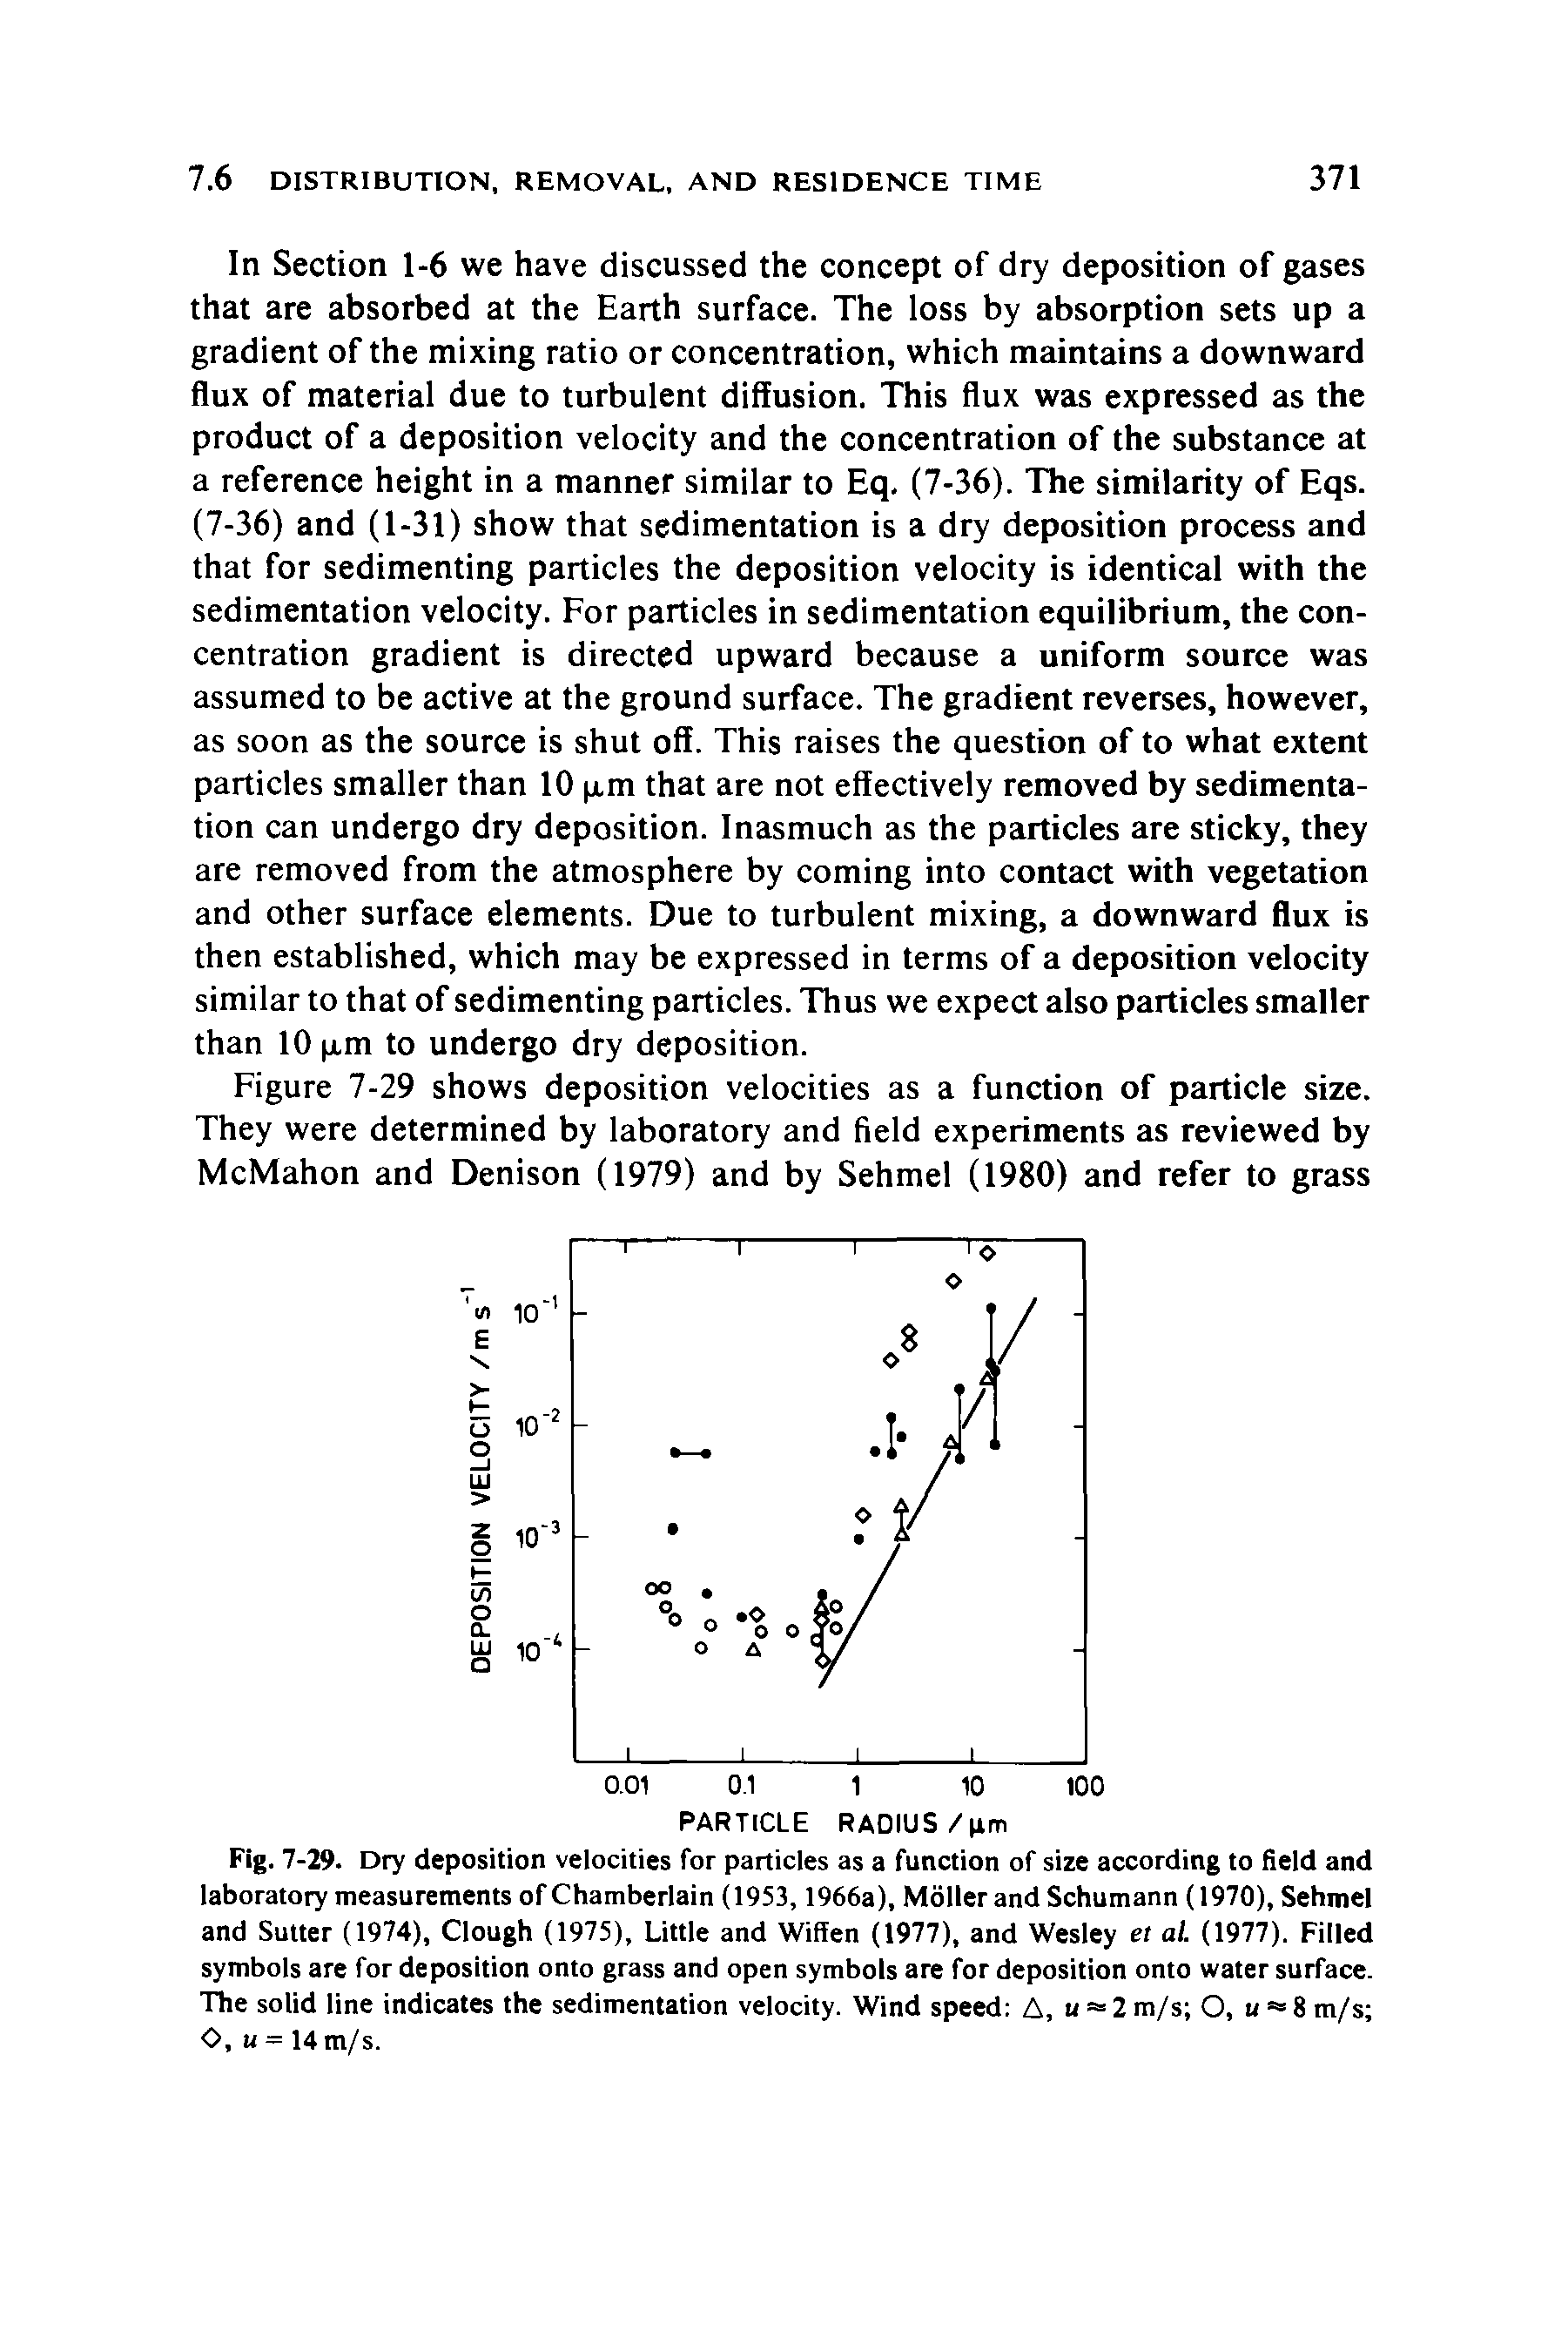 Fig. 7-29. Dry deposition velocities for particles as a function of size according to field and laboratory measurements of Chamberlain (1953, 1966a), Mollerand Schumann (1970), Sehmel and Sutter (1974), Clough (1975), Little and Wiffen (1977), and Wesley et al. (1977). Filled symbols are for deposition onto grass and open symbols are for deposition onto water surface. The solid line indicates the sedimentation velocity. Wind speed A, u = 2 m/s O, u = 8 m/s O, u = 14 m/s.